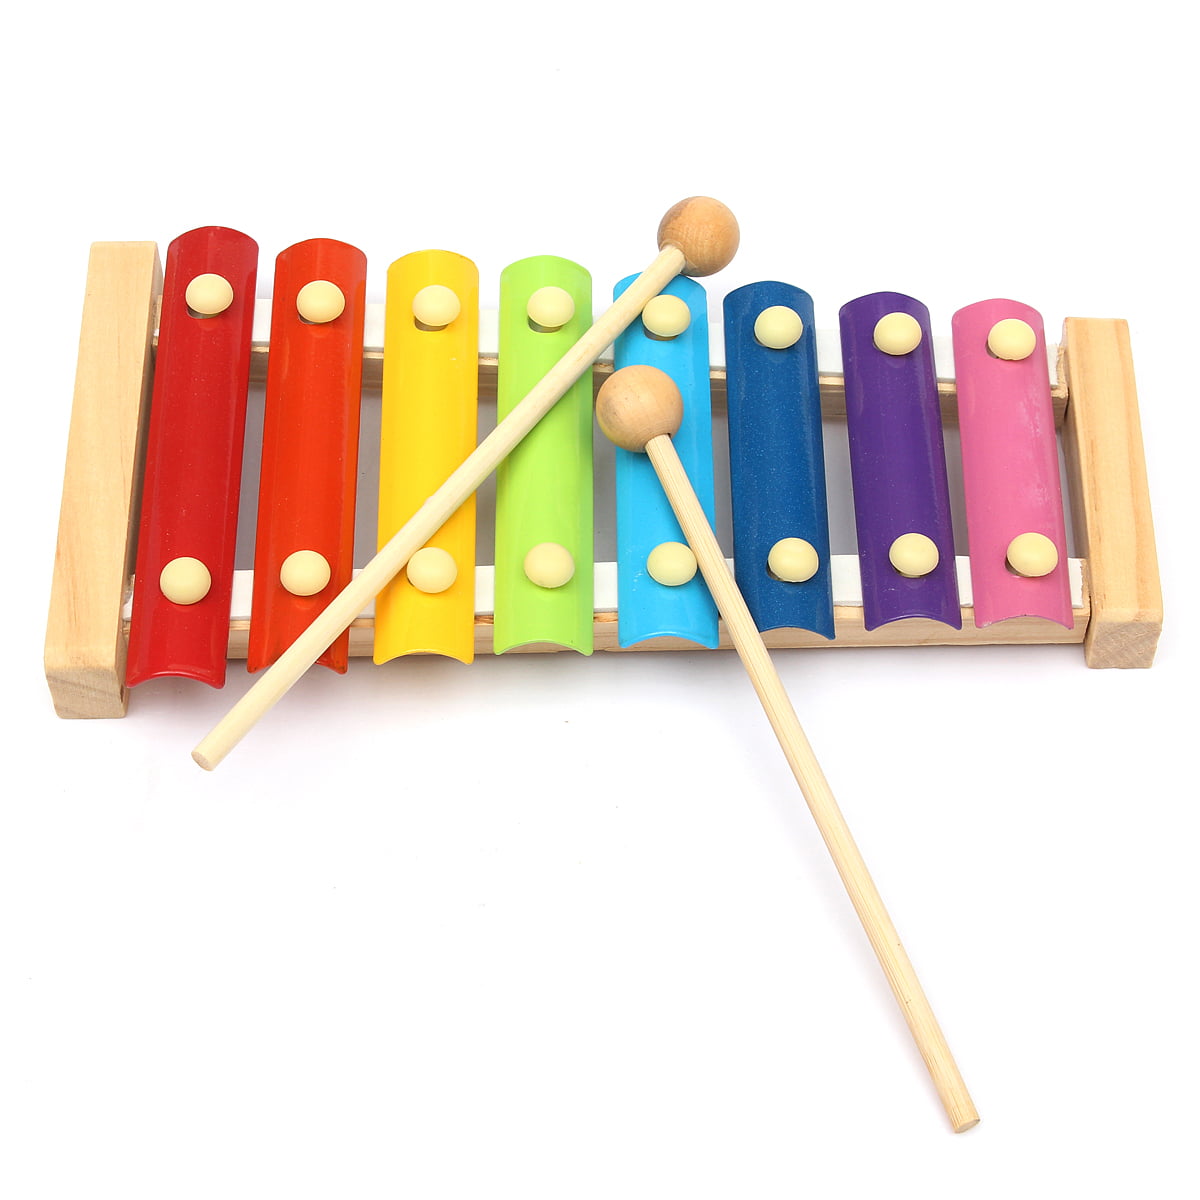 YUIO Colorful 8 Different Tones Hand Knock Wood Piano Kids Toy Xylophone Music Rhythm Learnin in Advance for Preschoolers Colorful